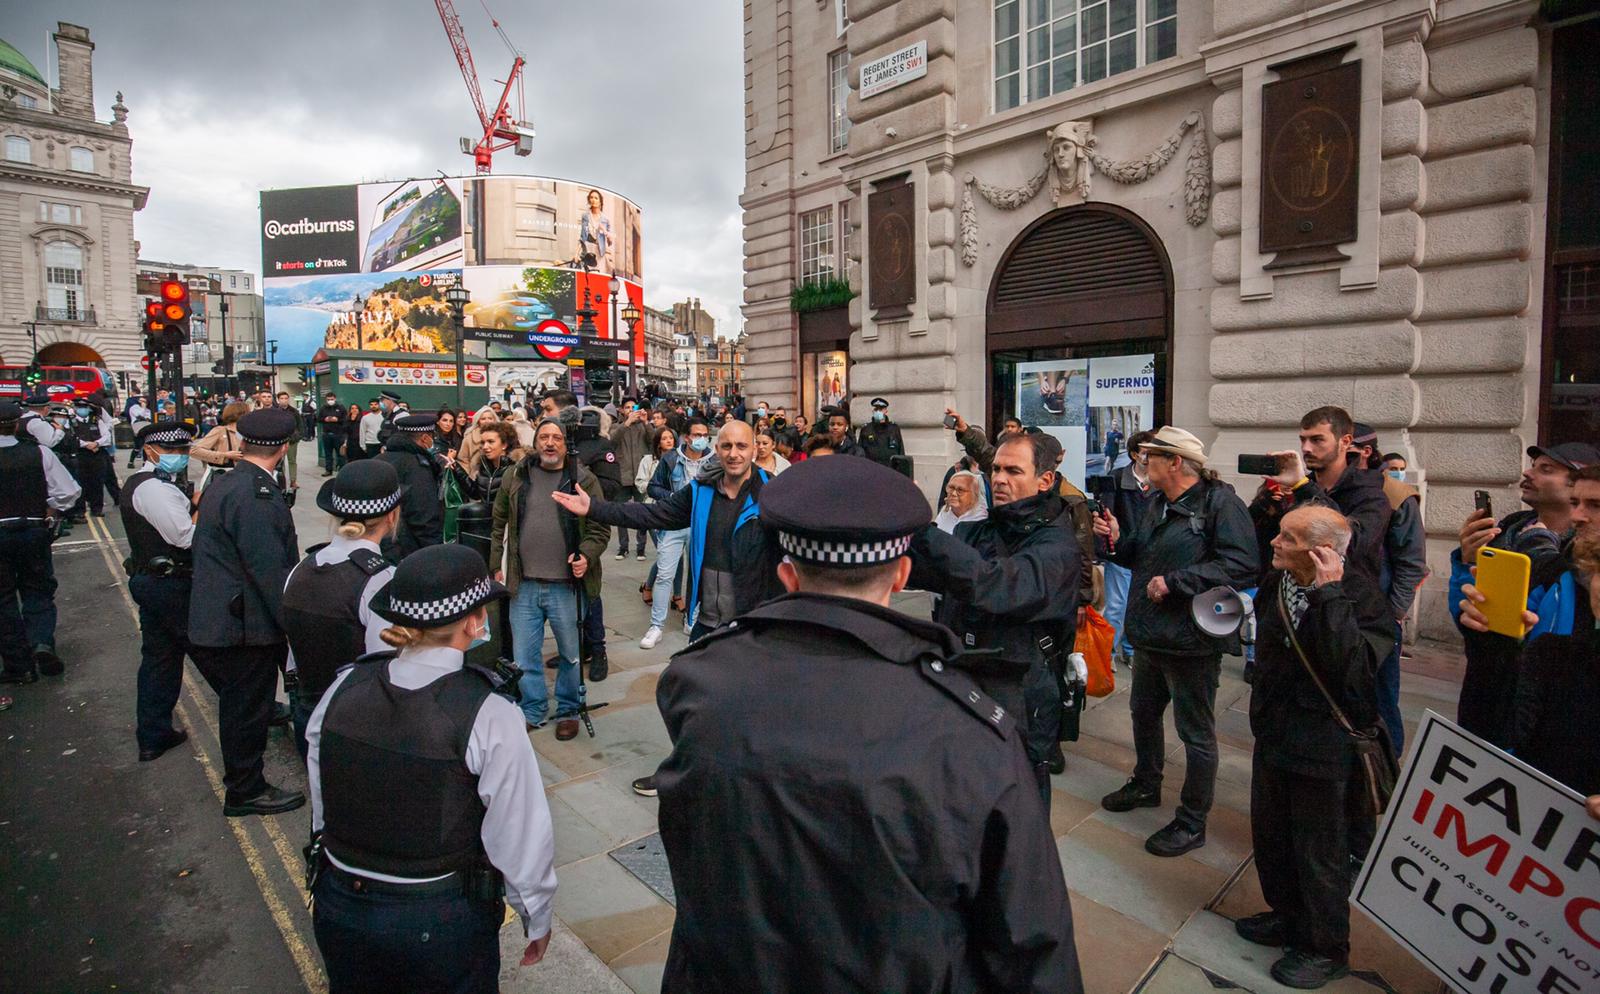 intimidation-failing-piccadilly-circus-london-3oct20.jpg